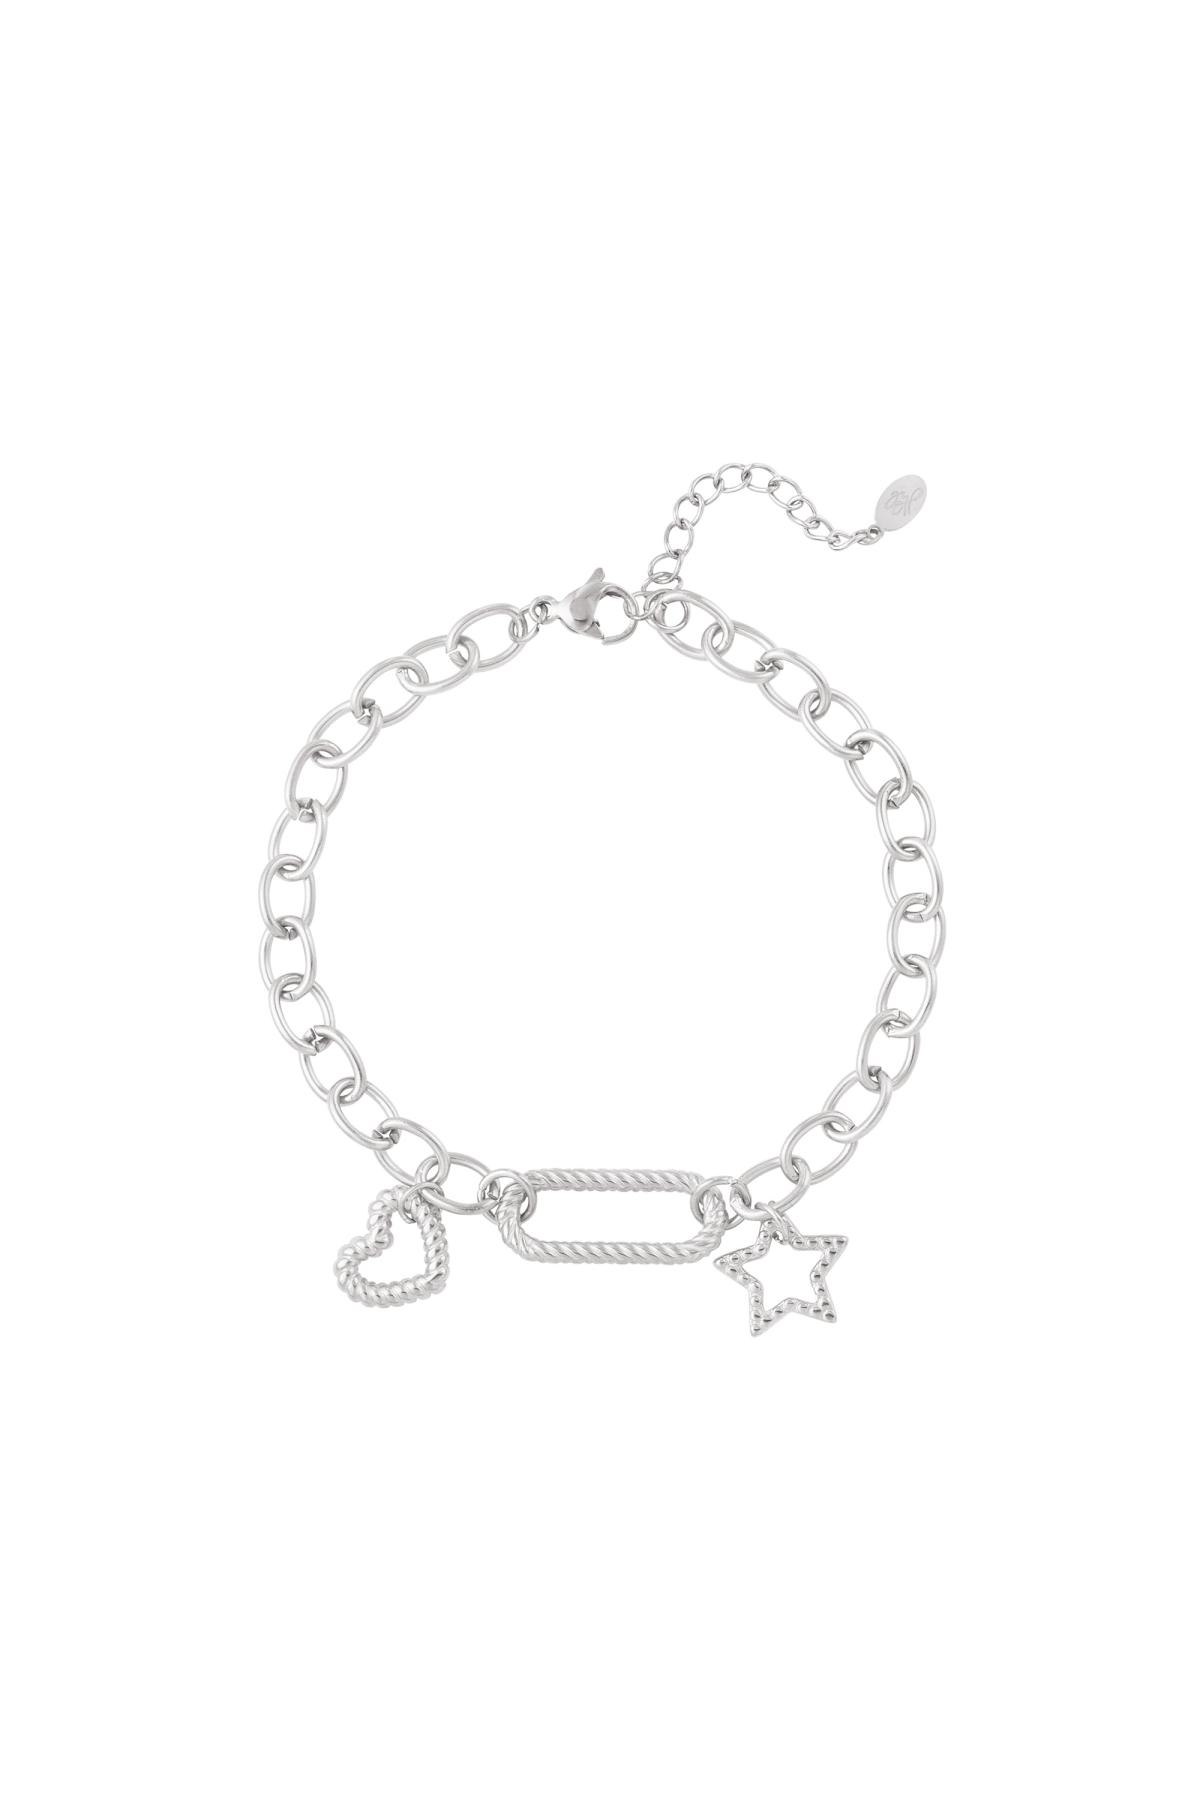 Bracelet with pendant and charms Silver Stainless Steel h5 